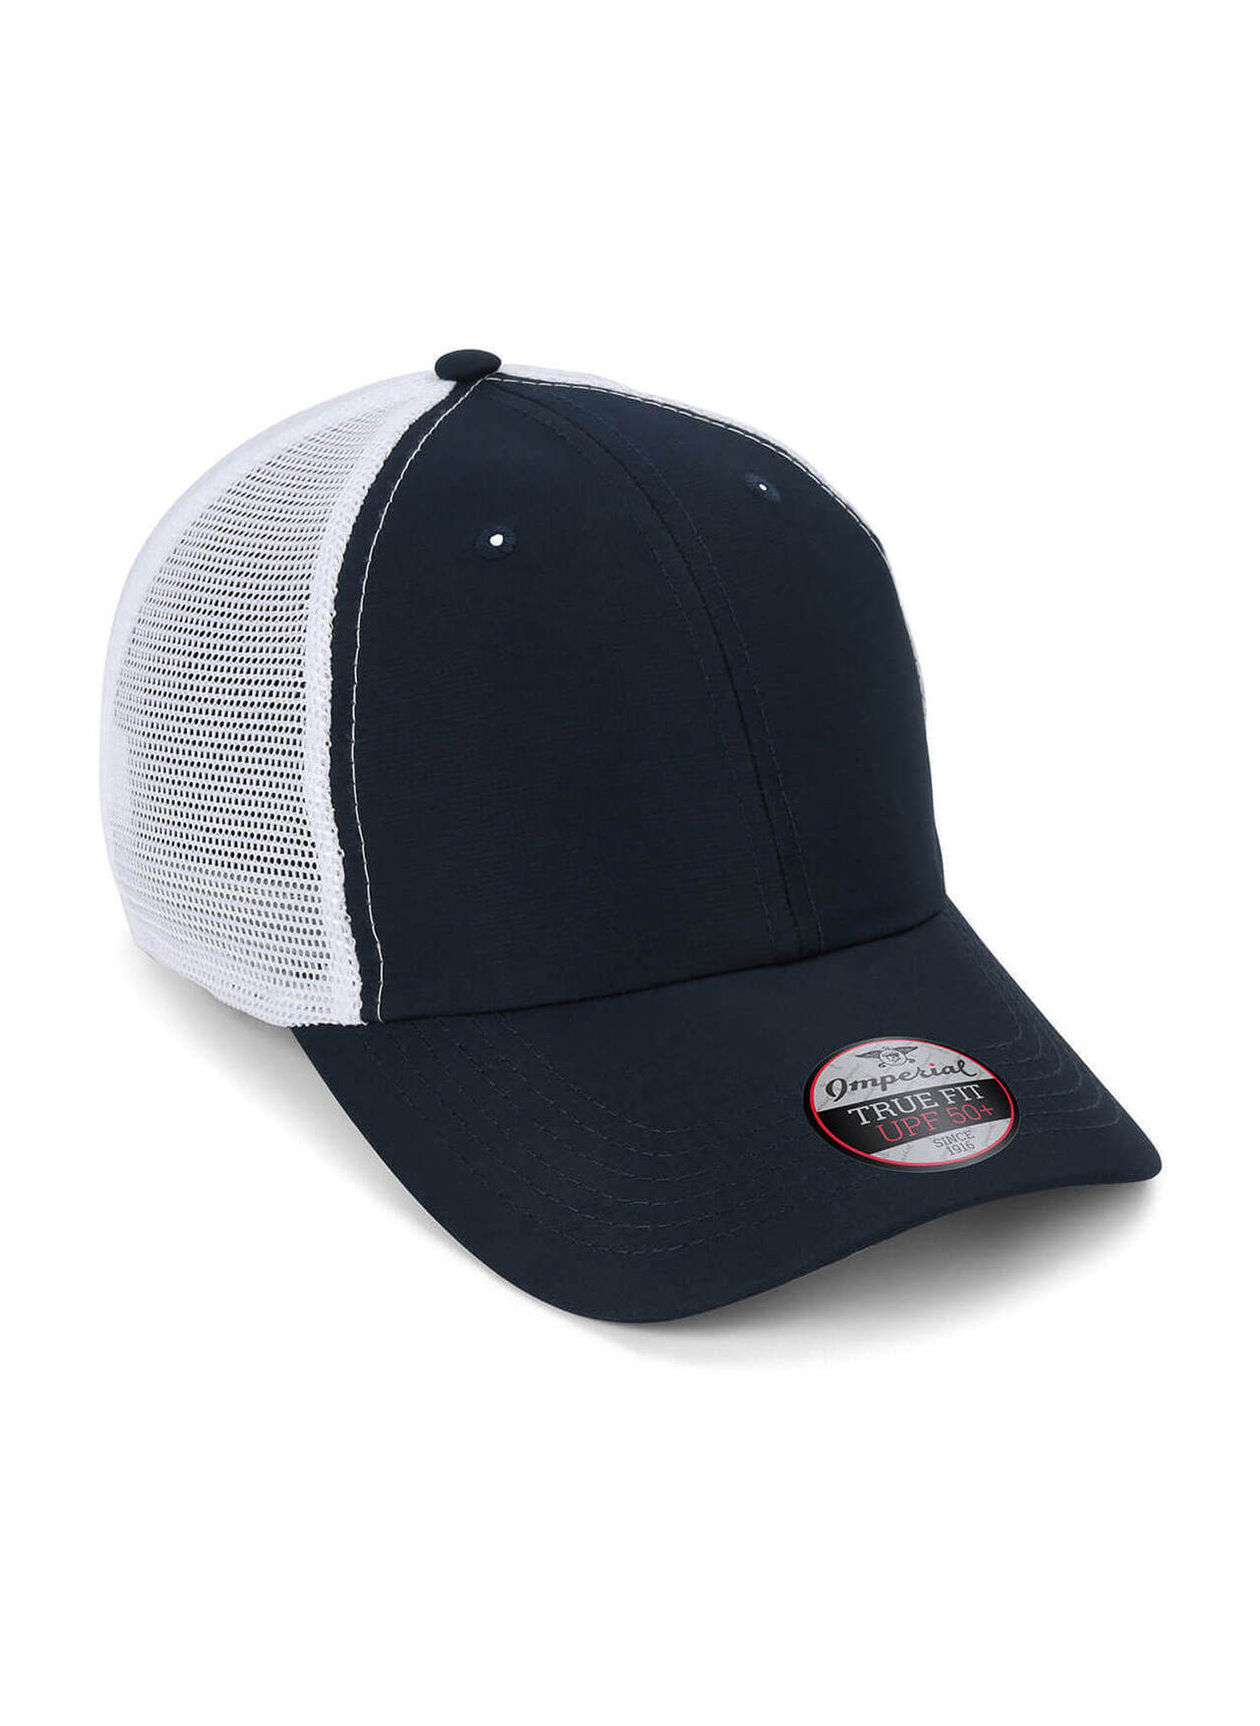 Imperial True Navy / White Structured Performance Meshback Hat